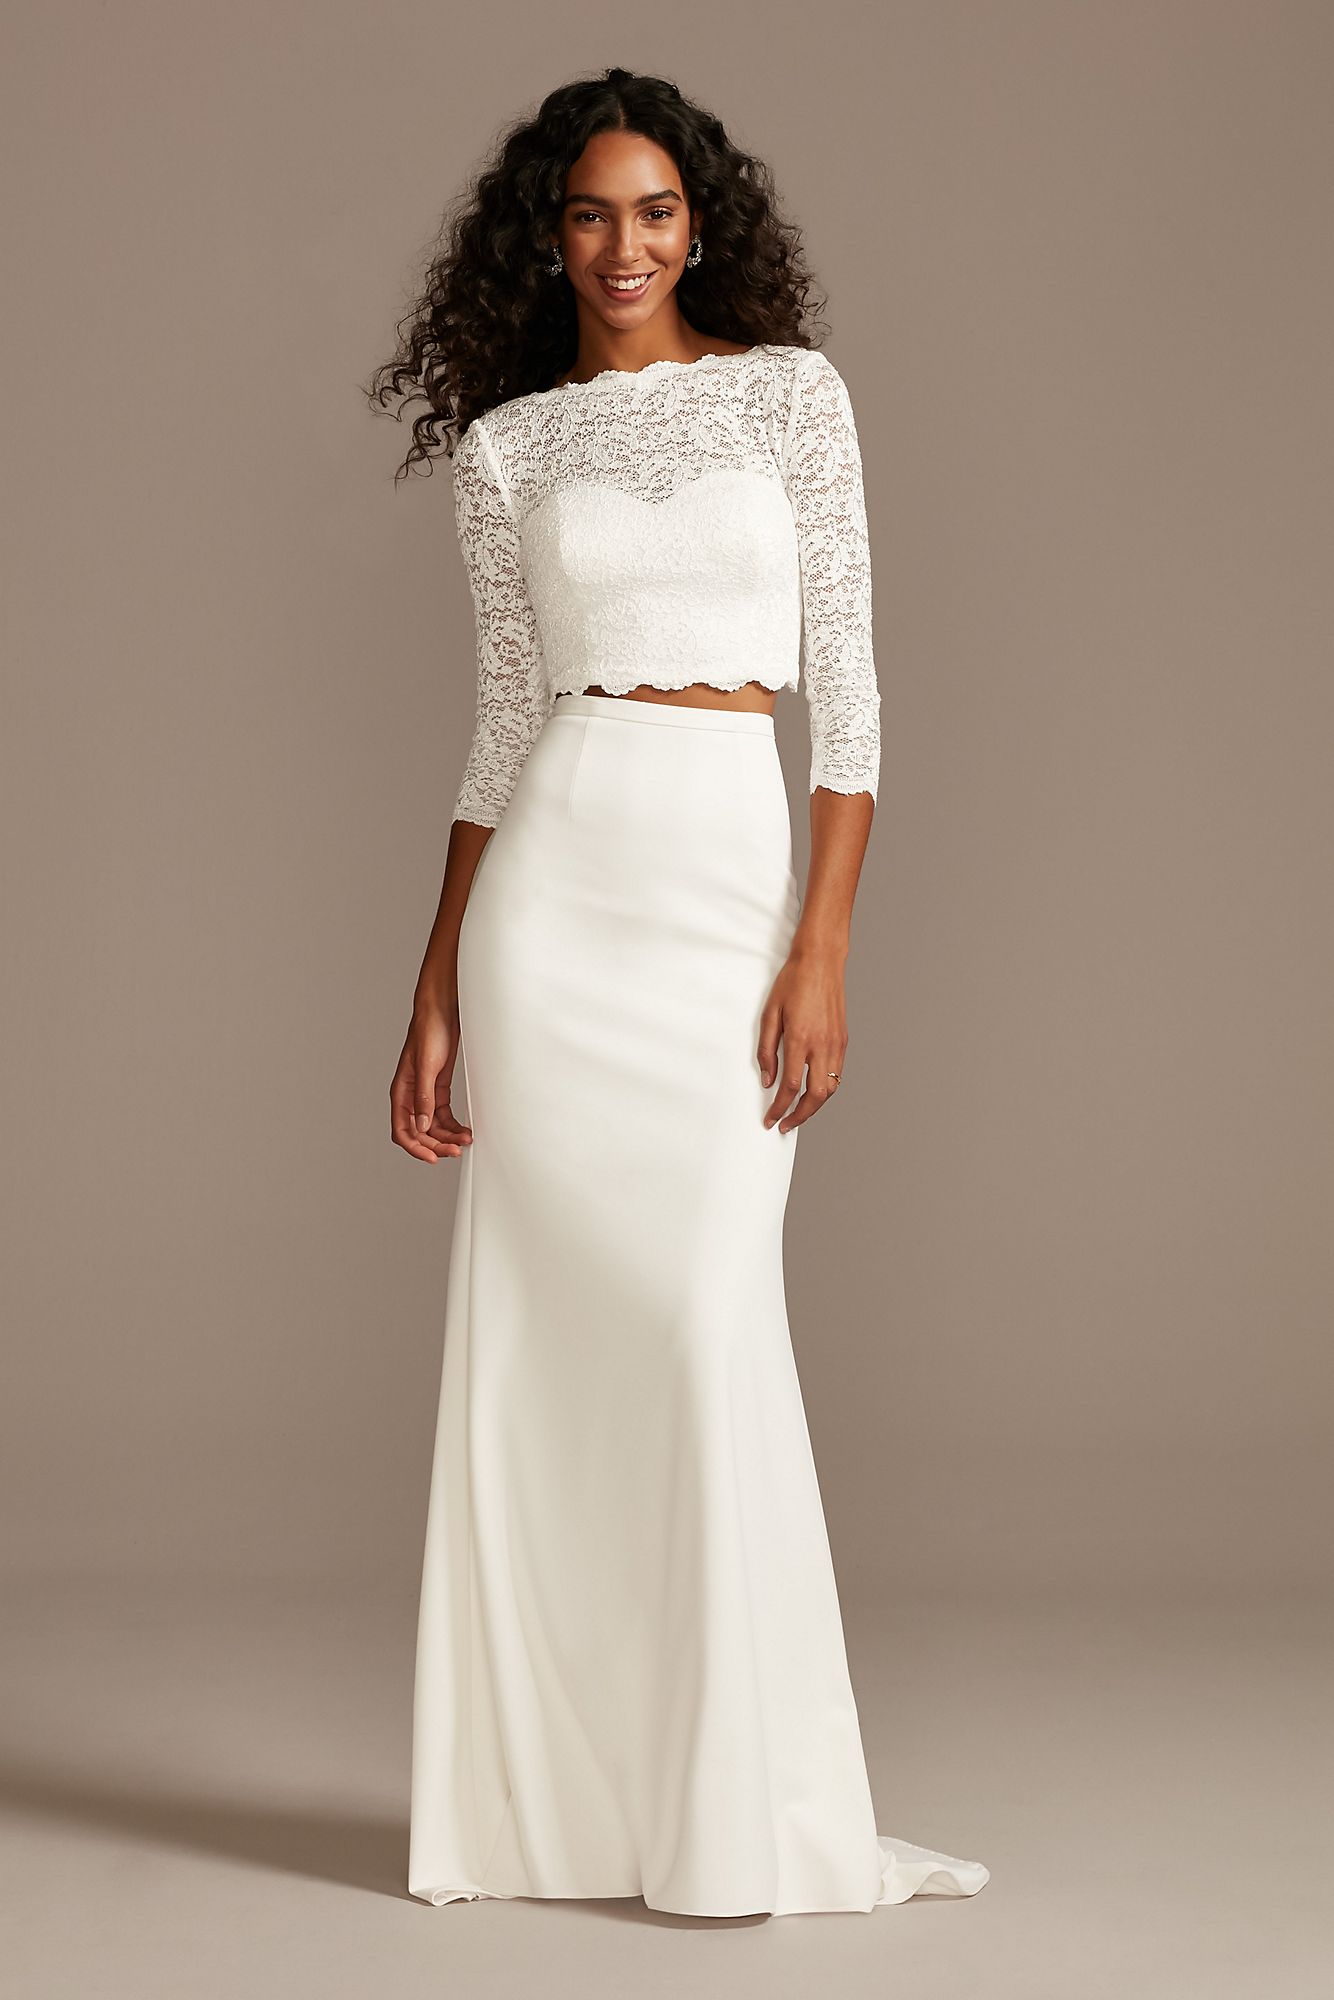 Scalloped Lace 3/4 Sleeve Wedding Separates Top DS150847